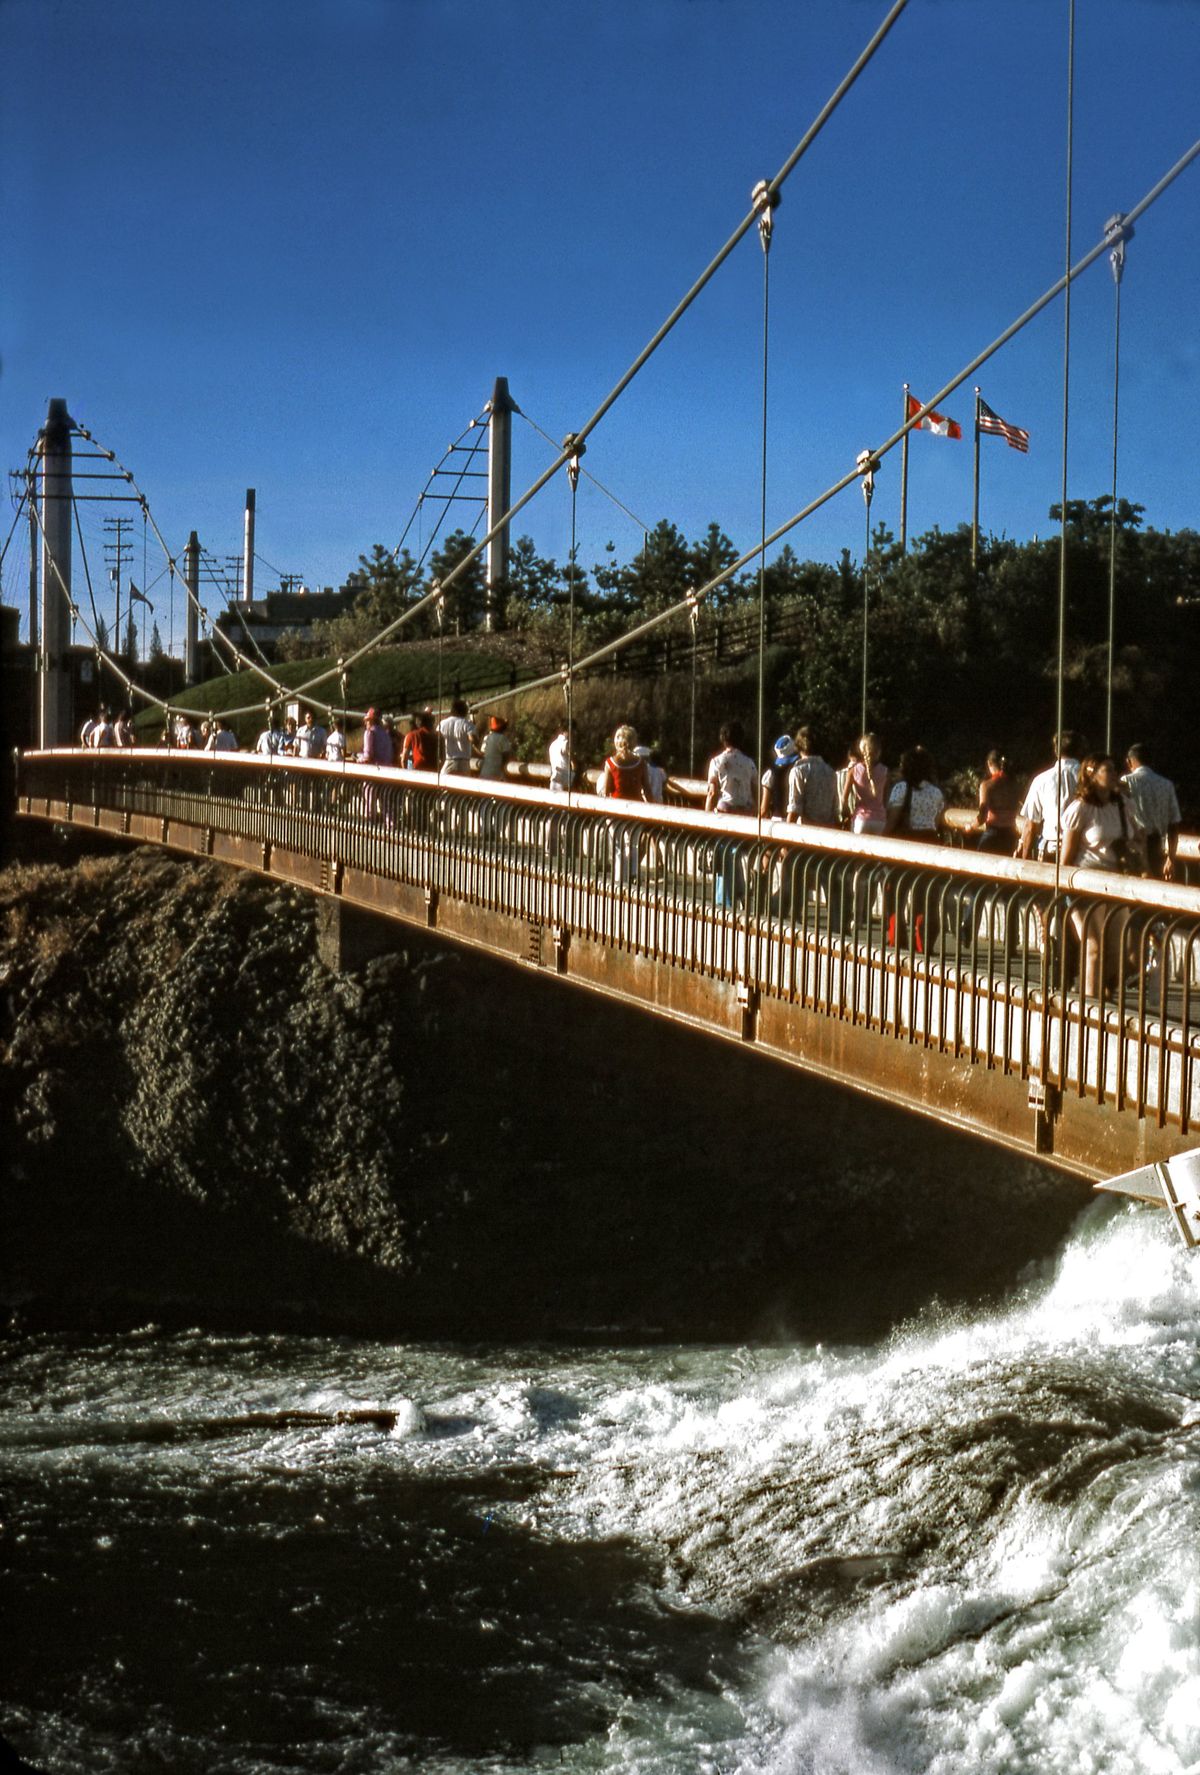 Another of the many delights for Riverfront Park visitors will be this pedestrian bridge connecting Canada Island to the south bank of the Spokane River. During Expo 